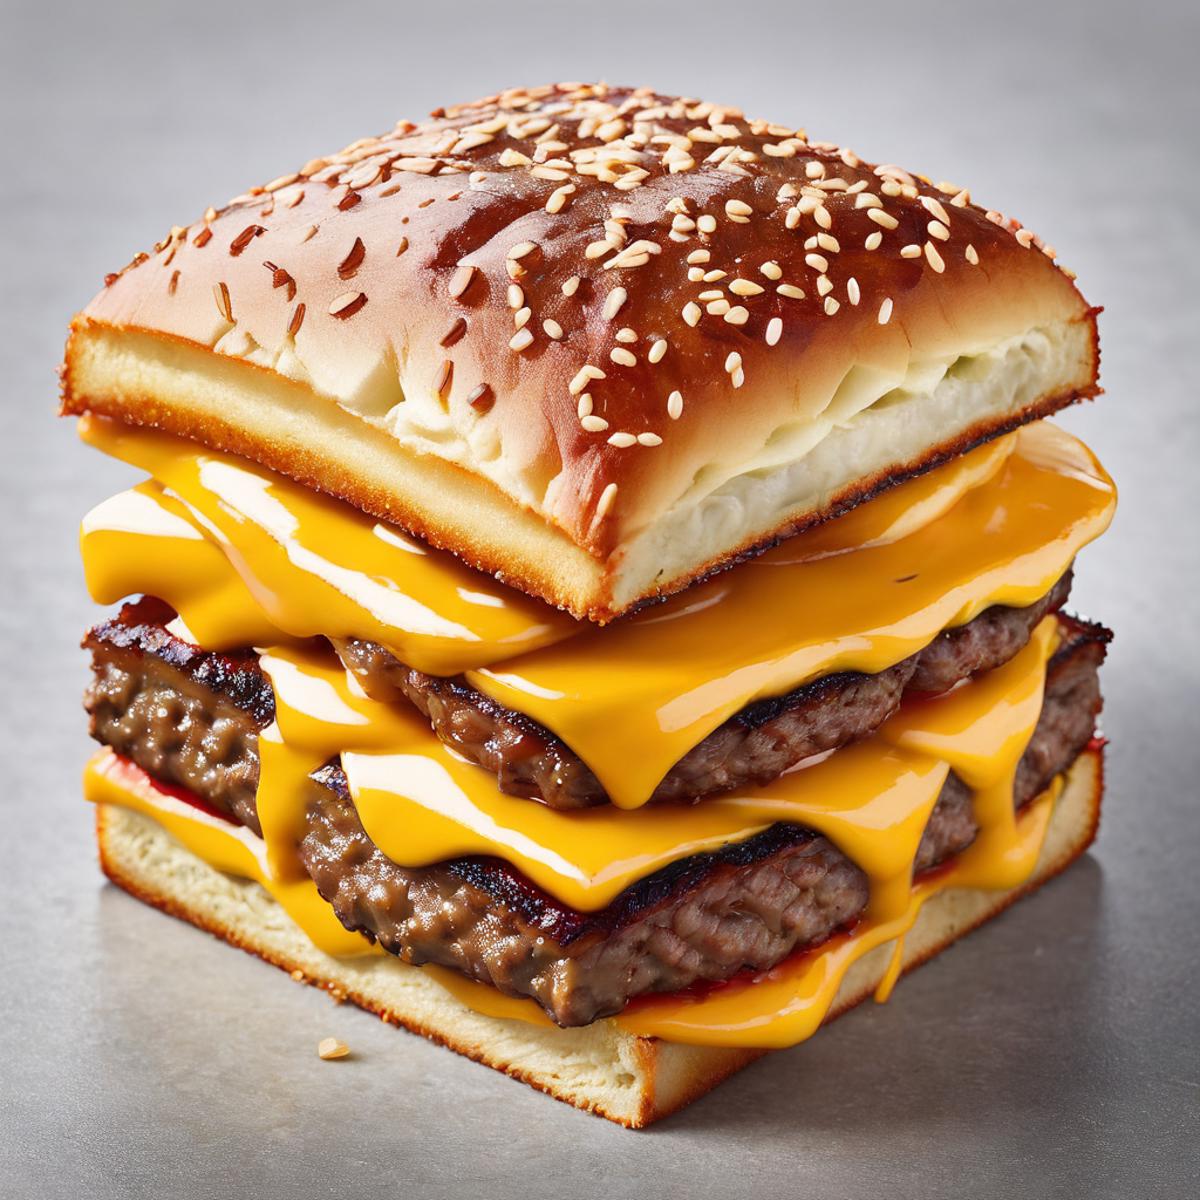 A delicious cheeseburger with sesame seeds on a bun on a table.